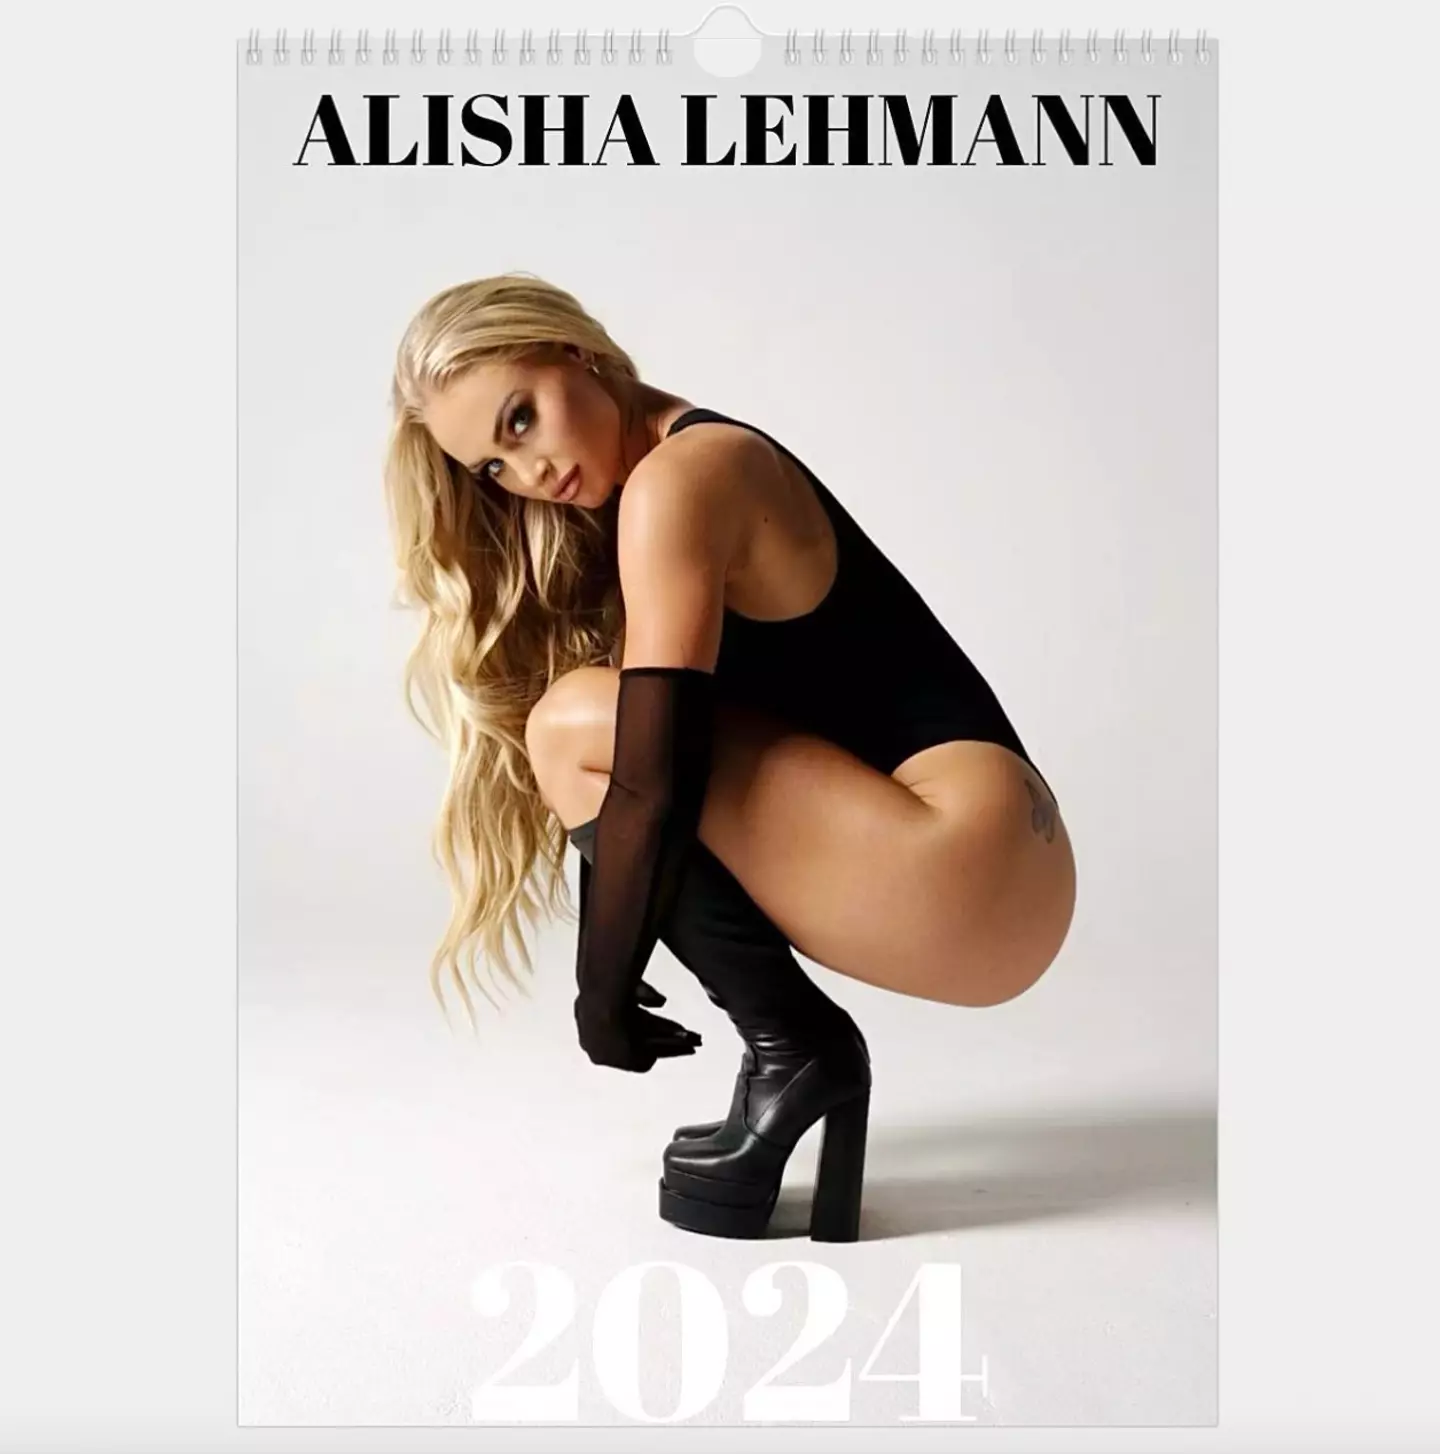 Lehmann has released a 2024 calendar costing up to £149.99.